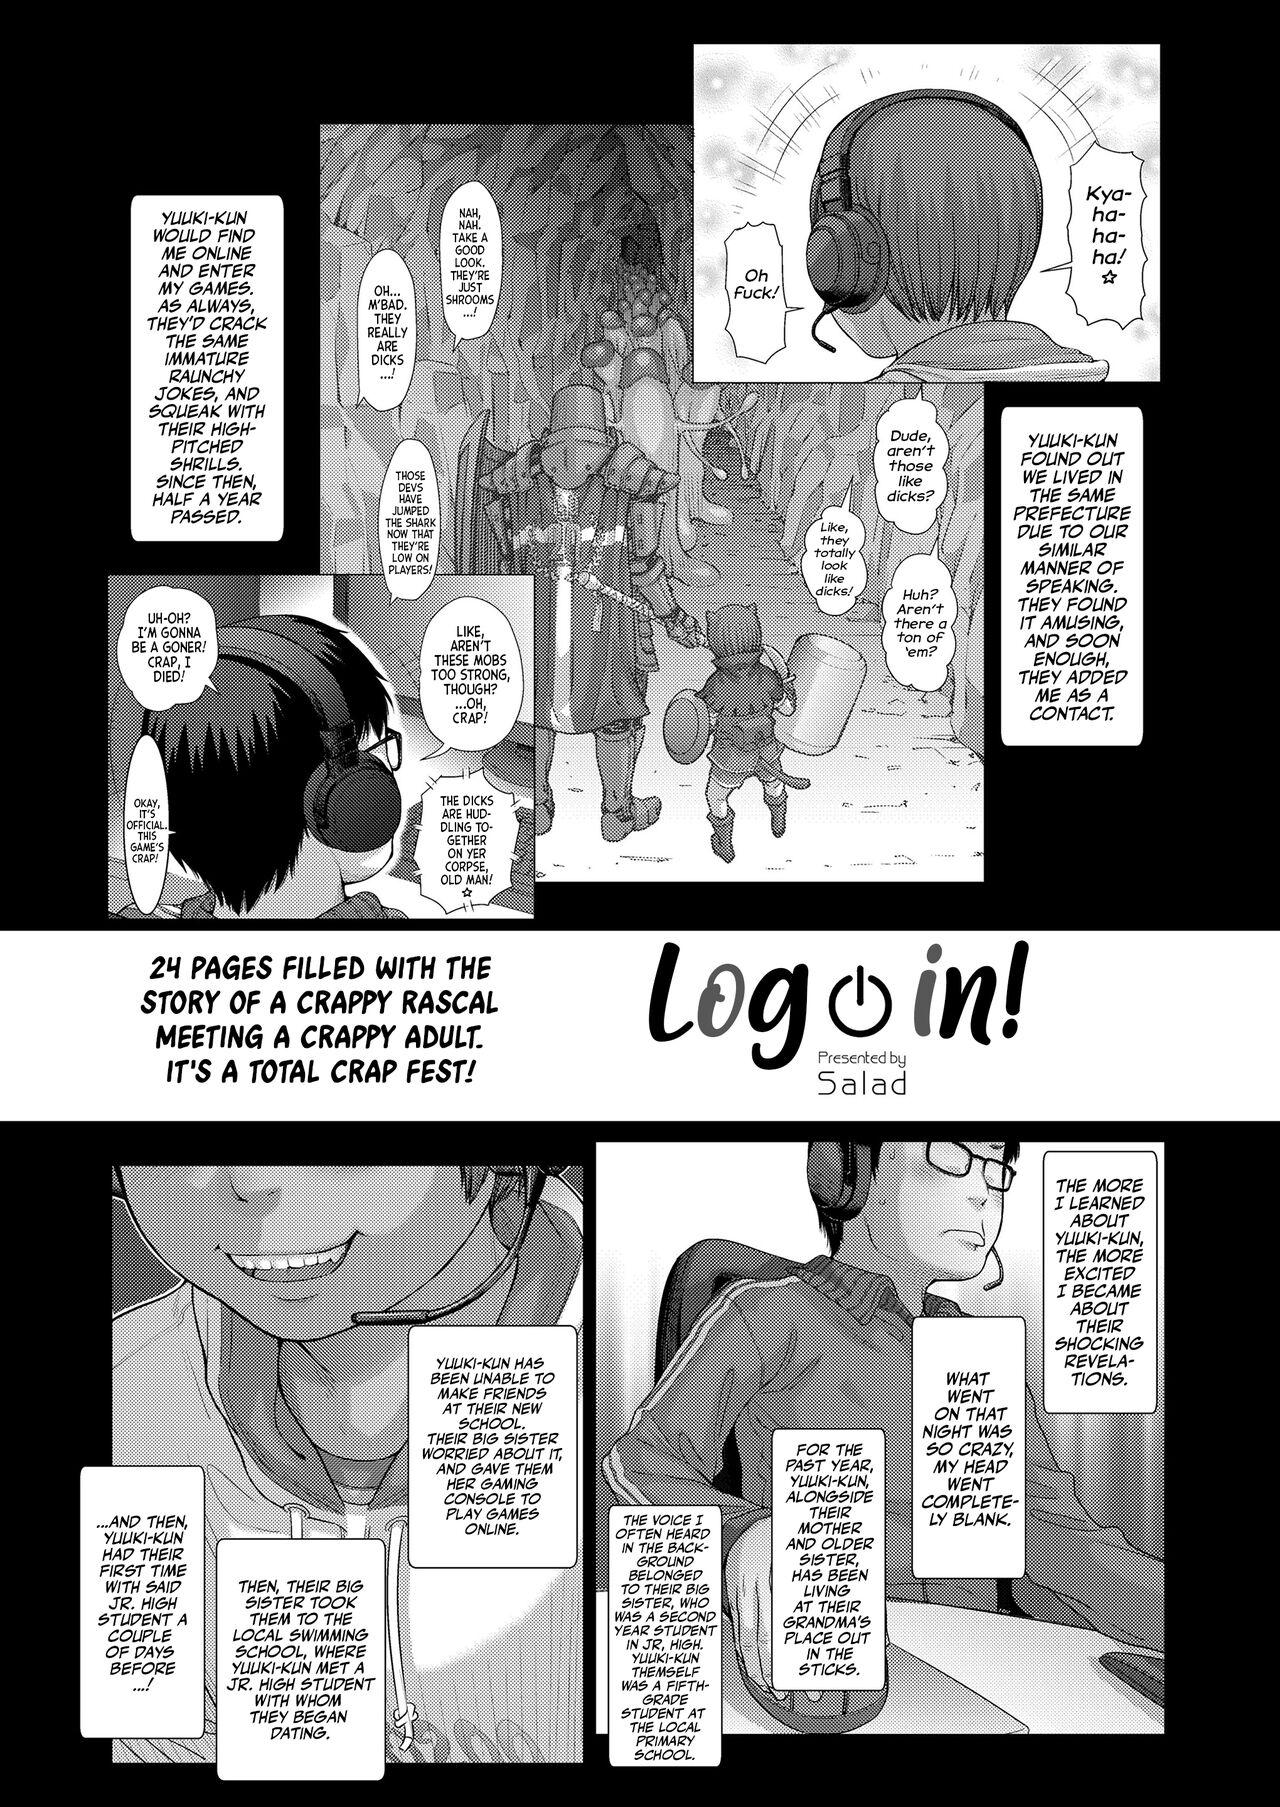 Kissing Log In! Lesbo - Page 2